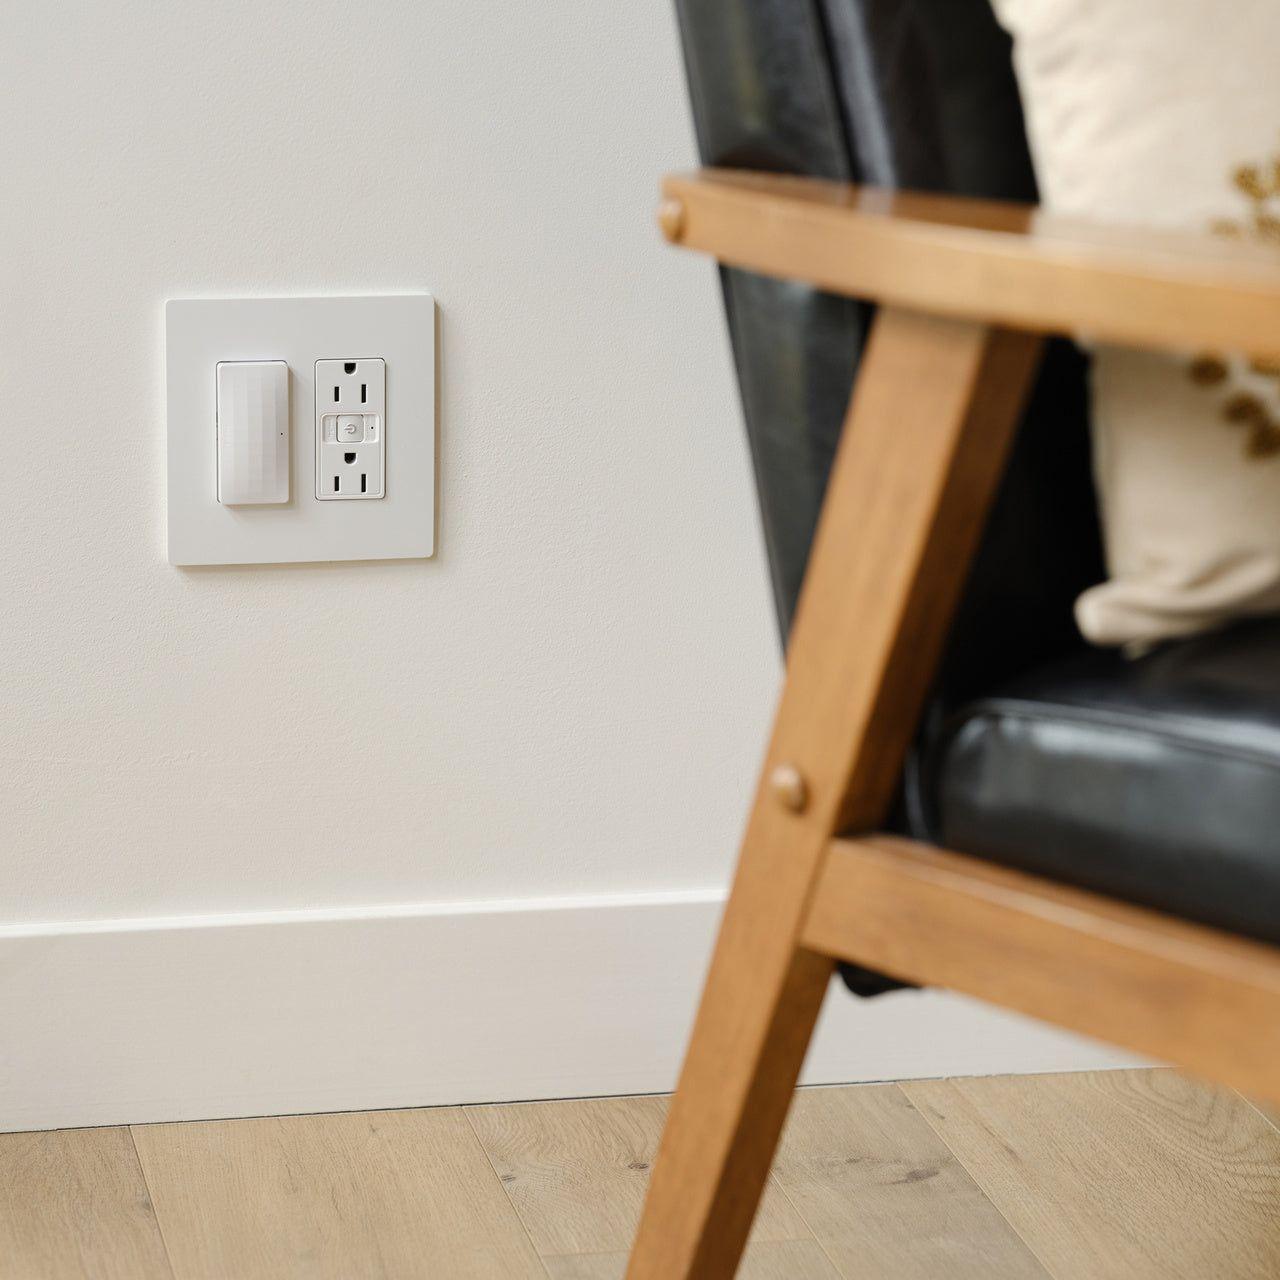 Legrand - Smart 15A Outlet with Netatmo - Lights Canada